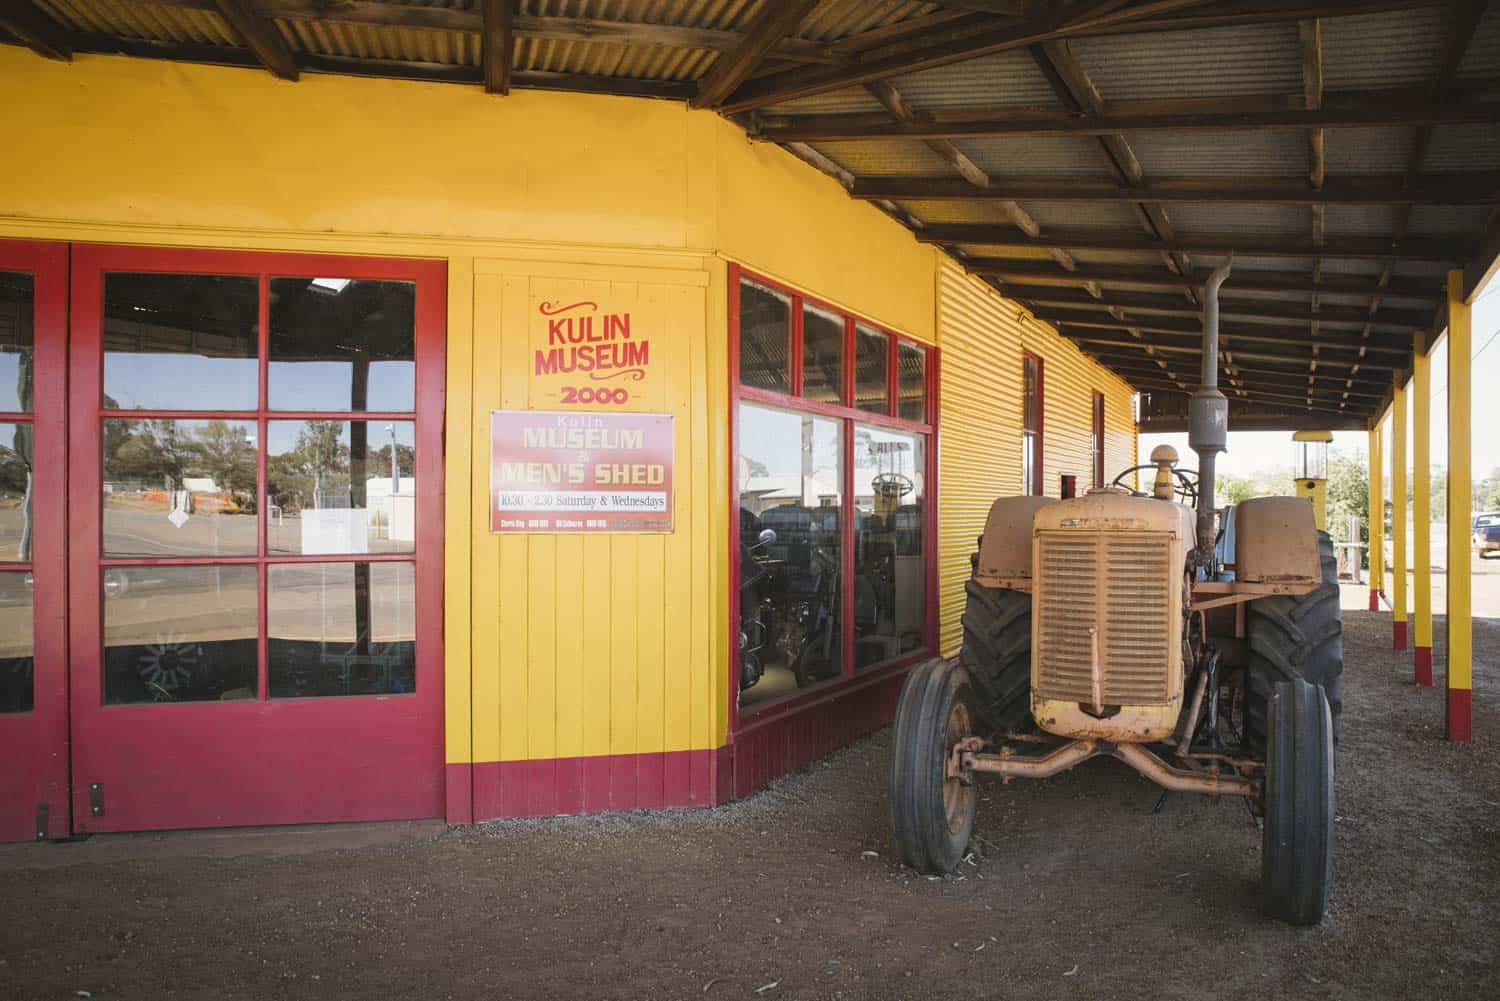 Image of a tractor in front of the Kulin Museum in the Wheatbelt